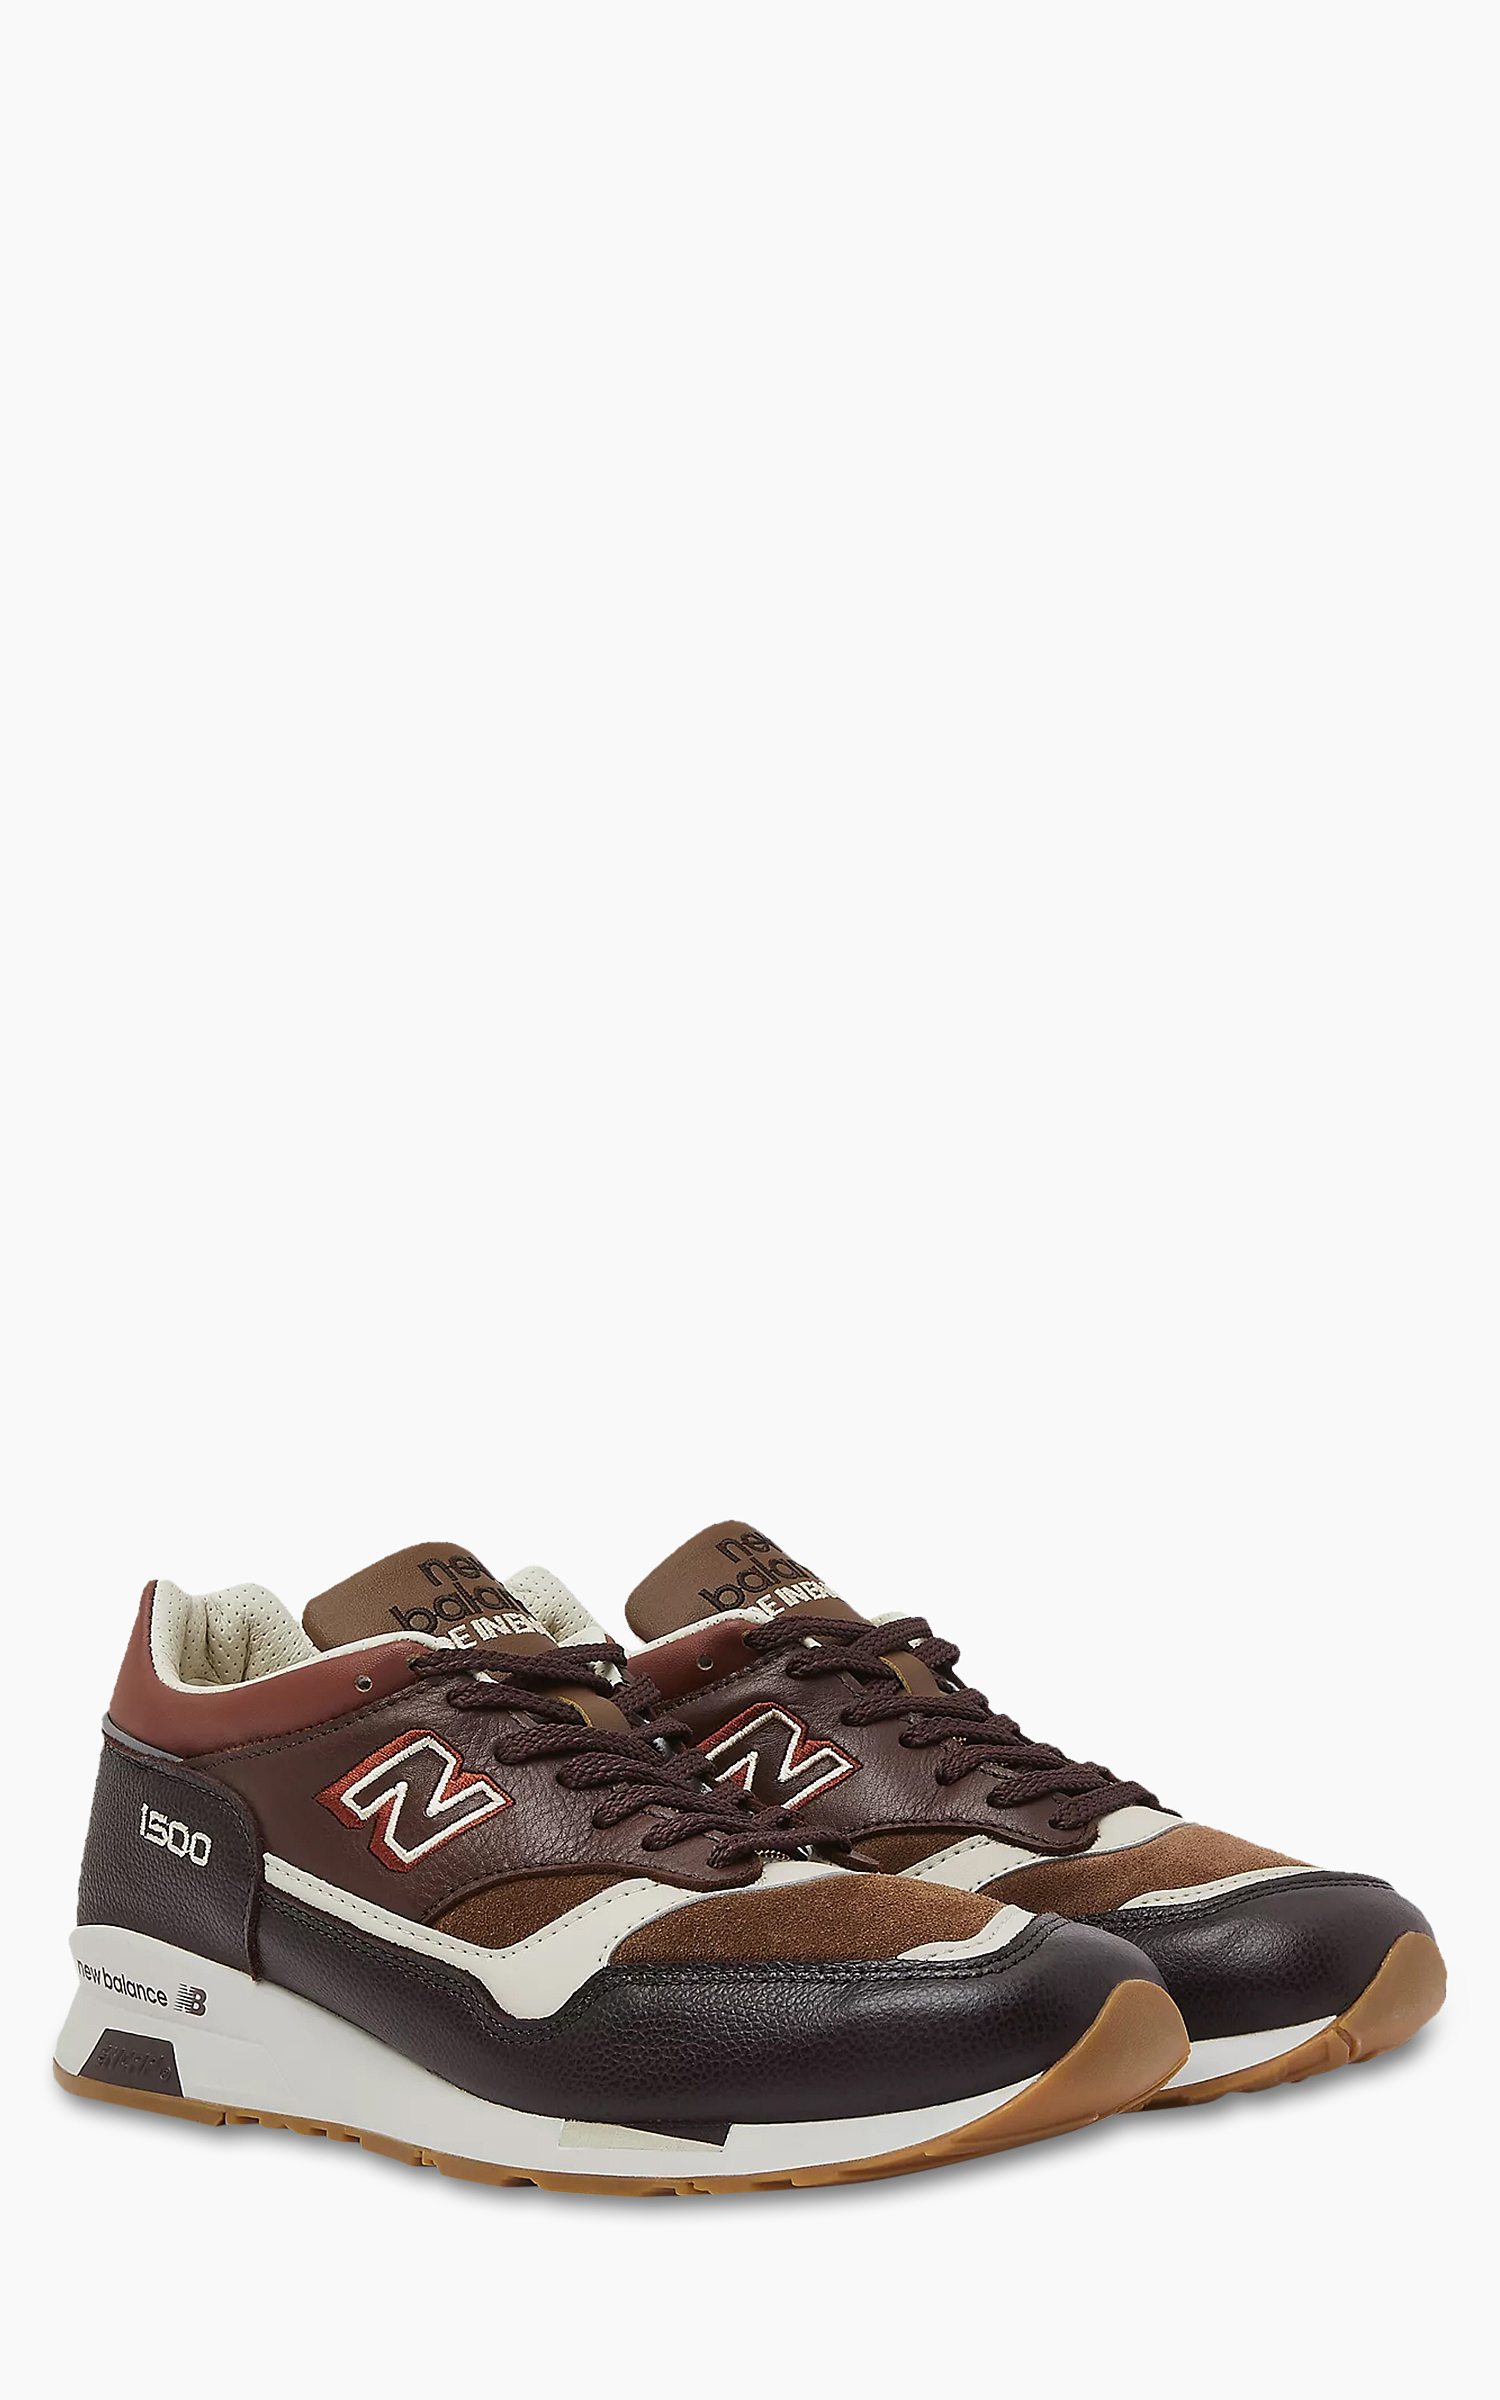 New Balance M1500 GBI Earth/French Roast/Feather Gray "Made in UK